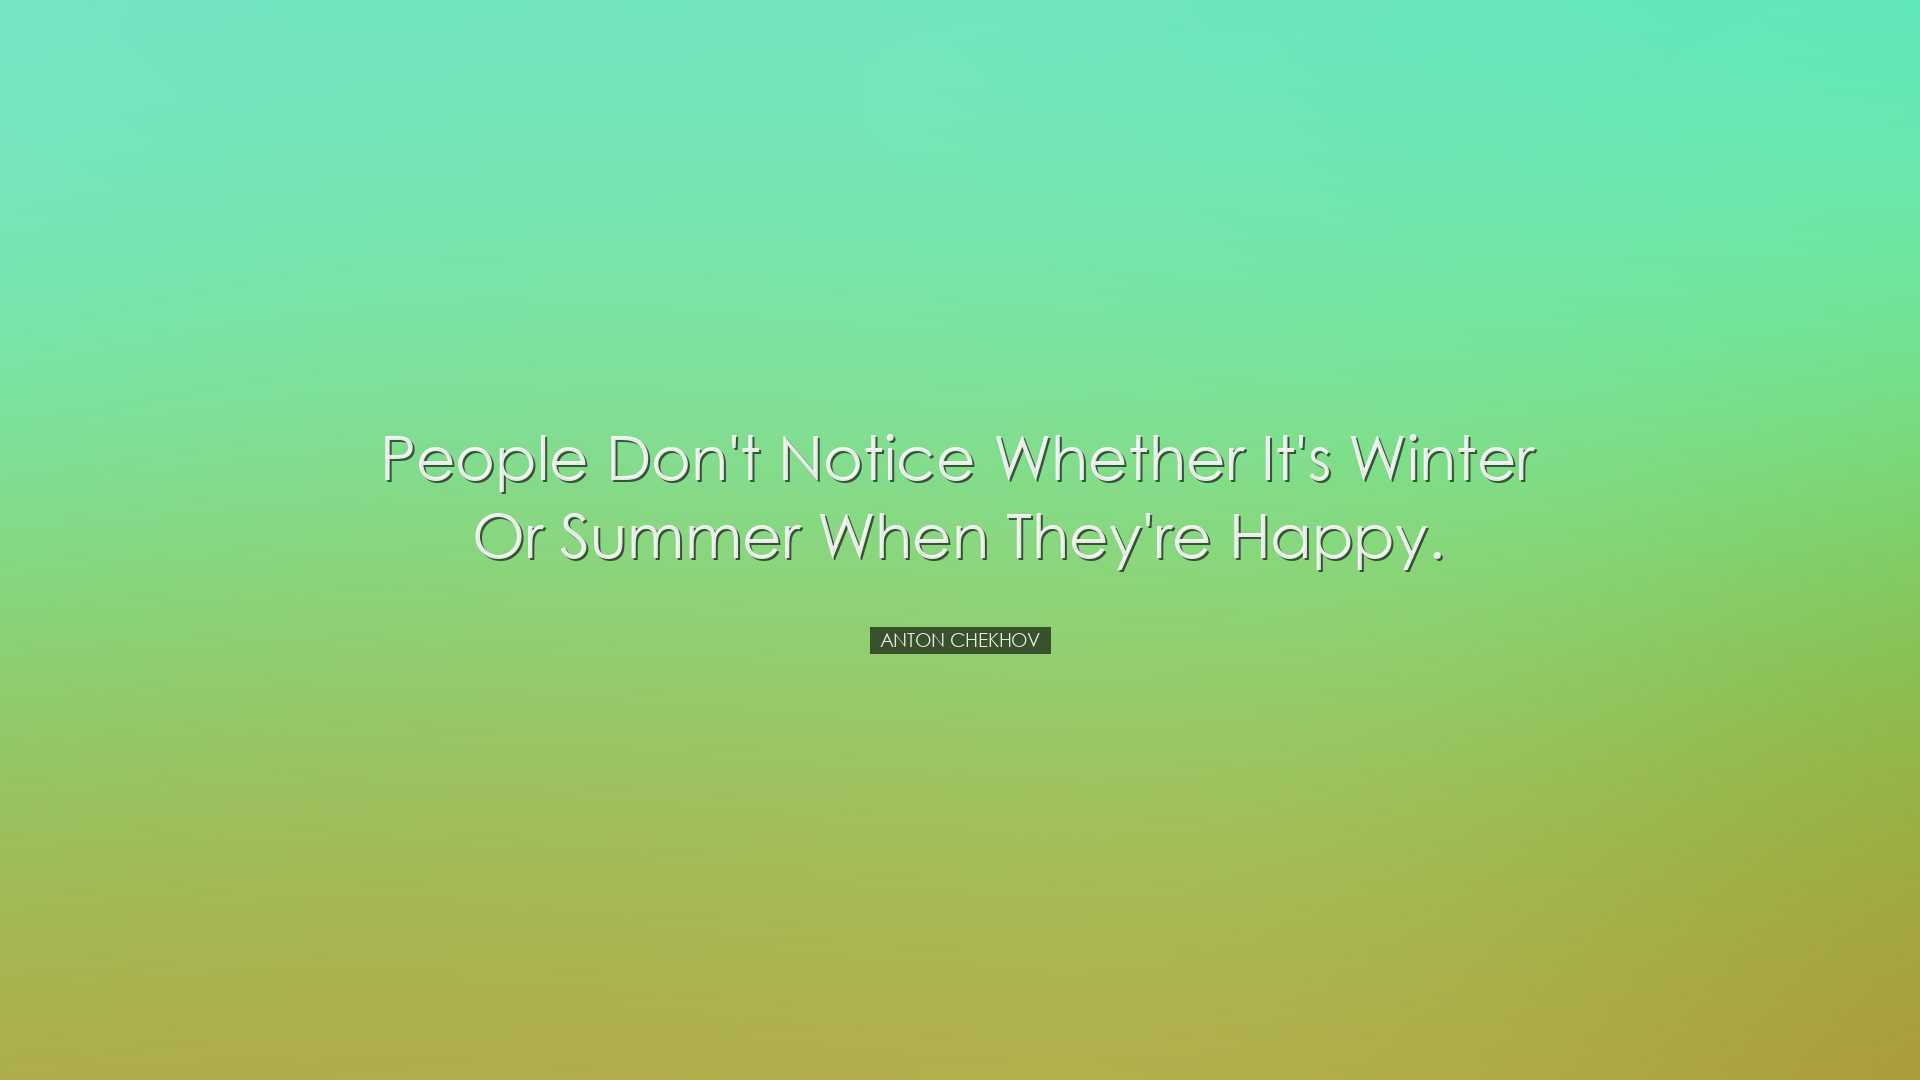 People don't notice whether it's winter or summer when they're hap